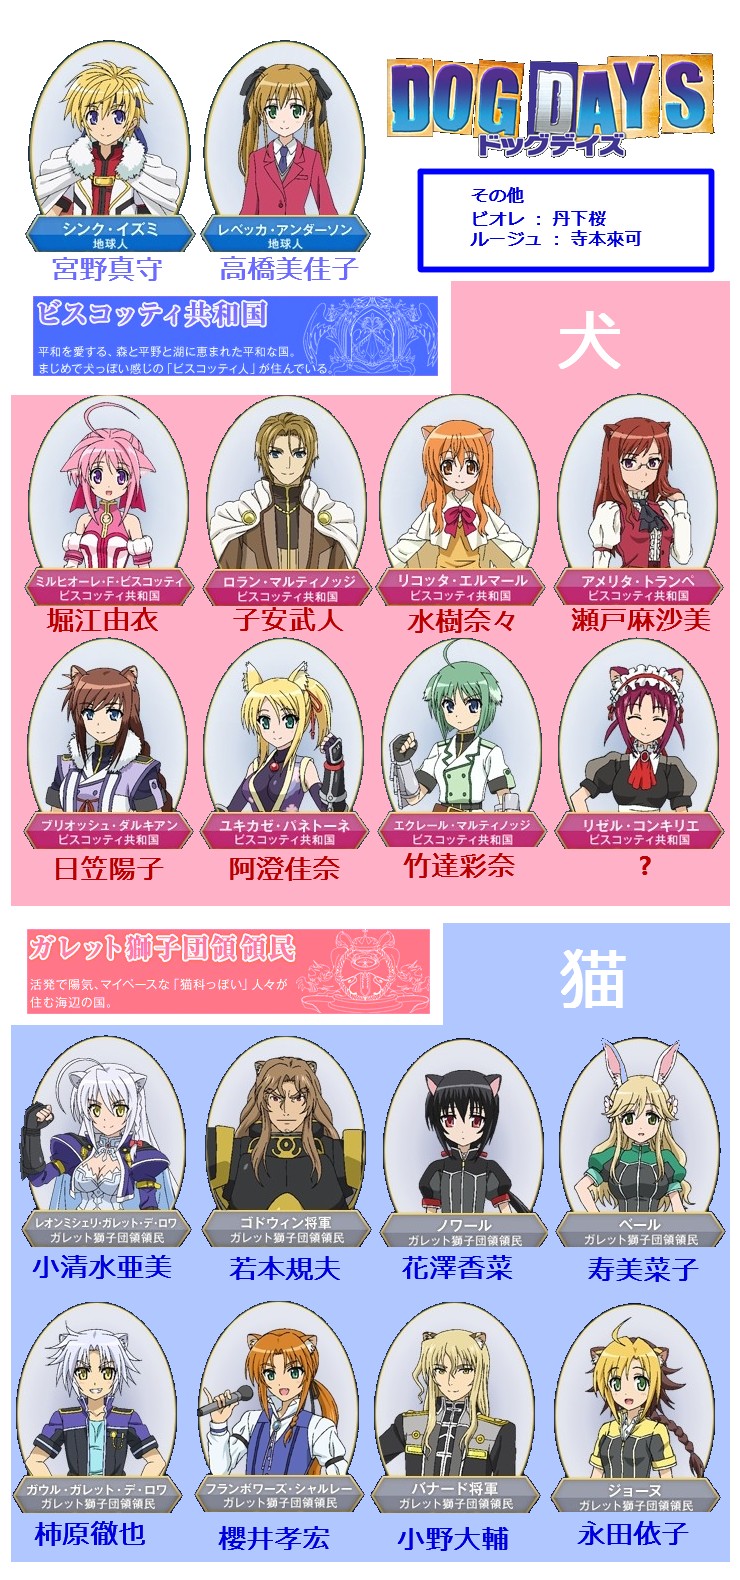 Spring 11 Anime Dog Days Character Sheet Anime Is Taking Over The World